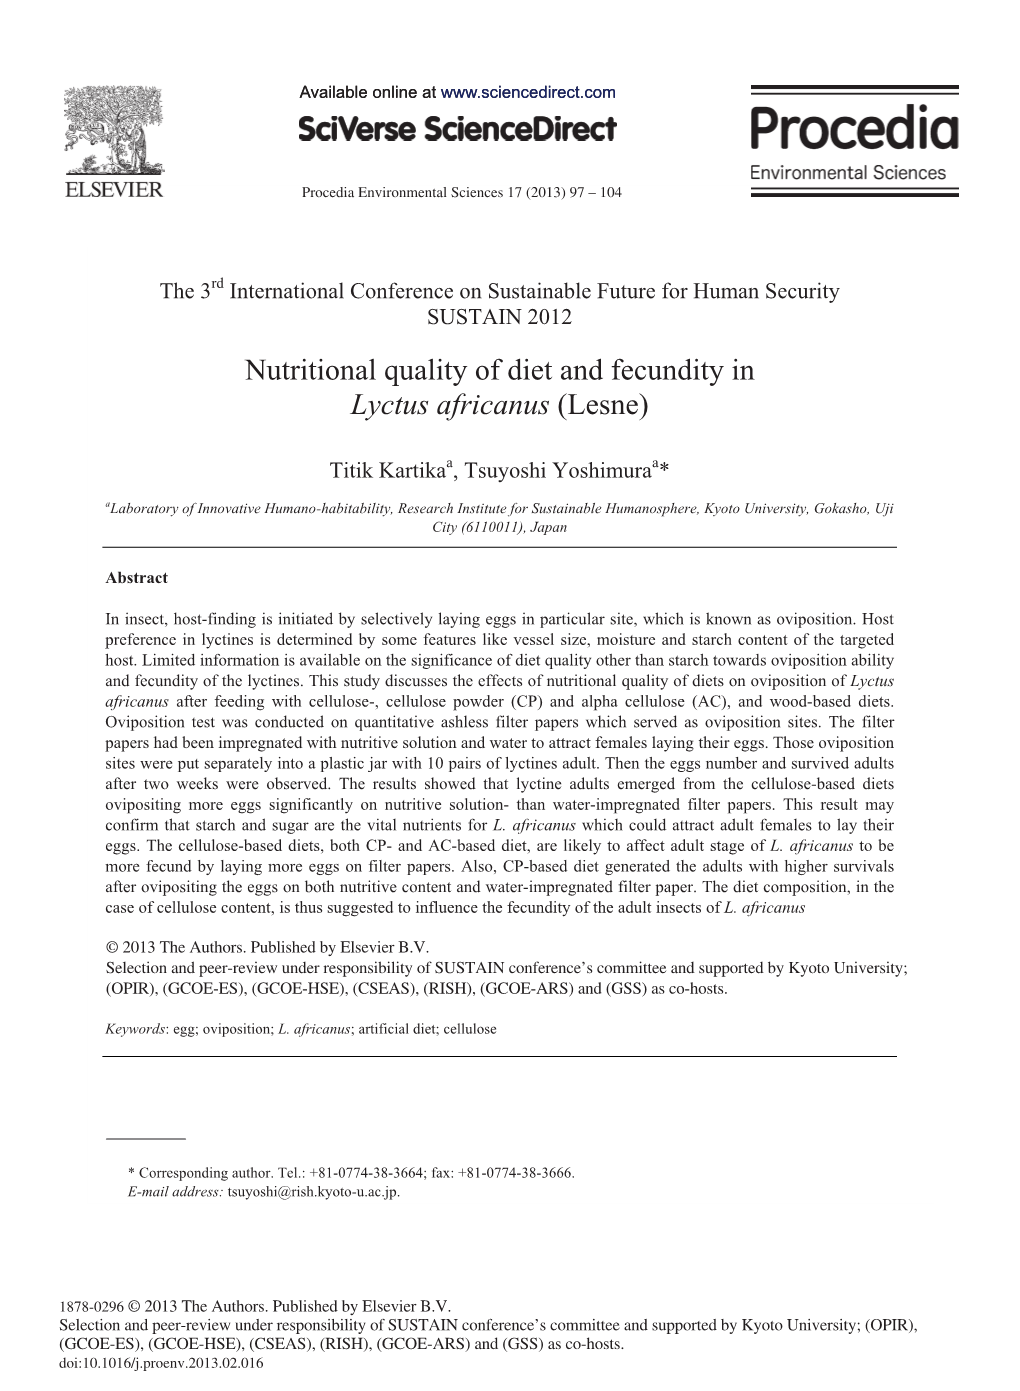 Nutritional Quality of Diet and Fecundity in Lyctus Africanus (Lesne)